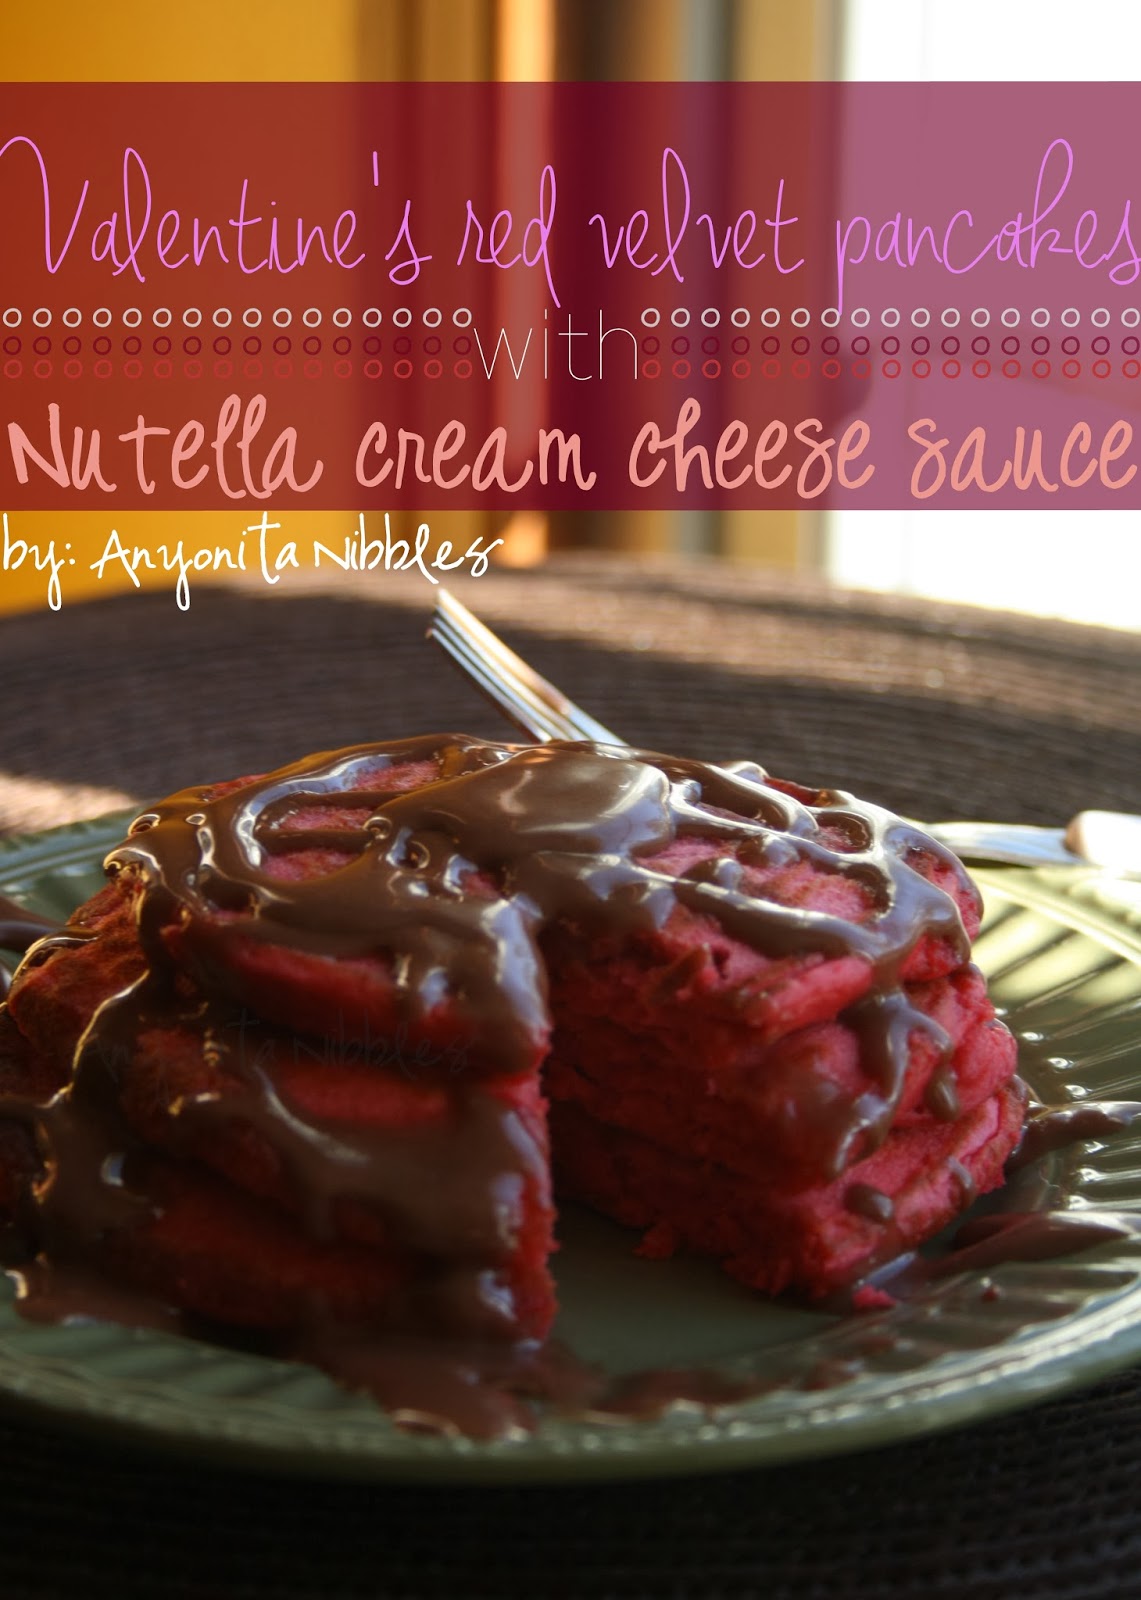 Valentine's Red Velvet Pancakes with Nutella Cream Cheese Sauce from www.anyonita-nibbles.com